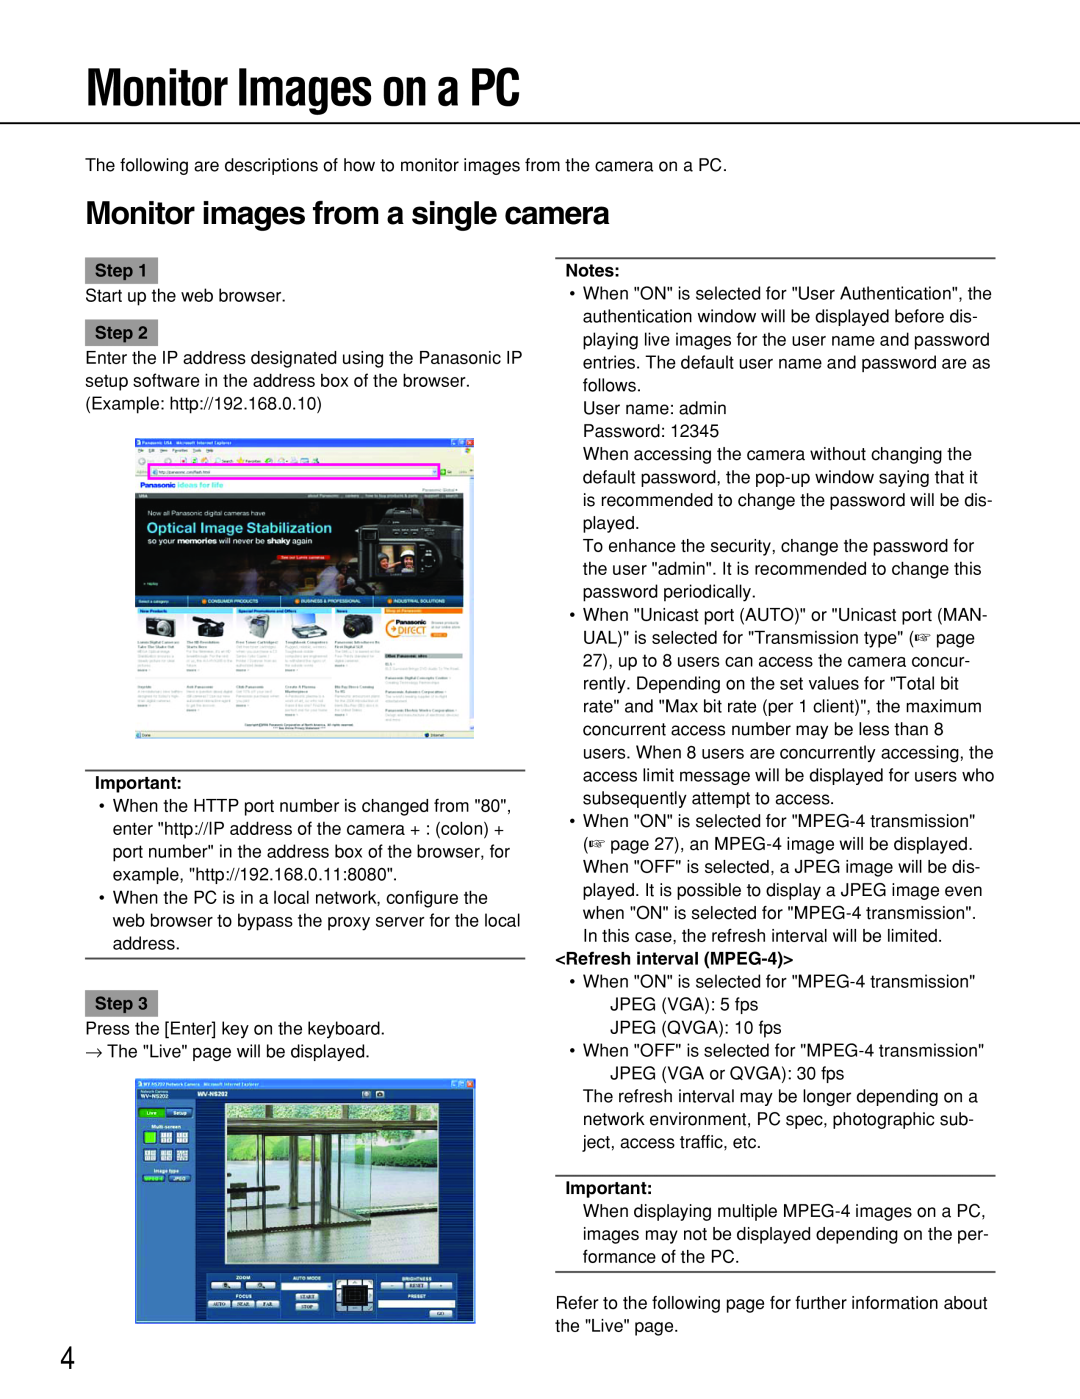 Panasonic WV-NS202 operating instructions Monitor Images on a PC, Step, Notes, <Refresh interval MPEG-4> 